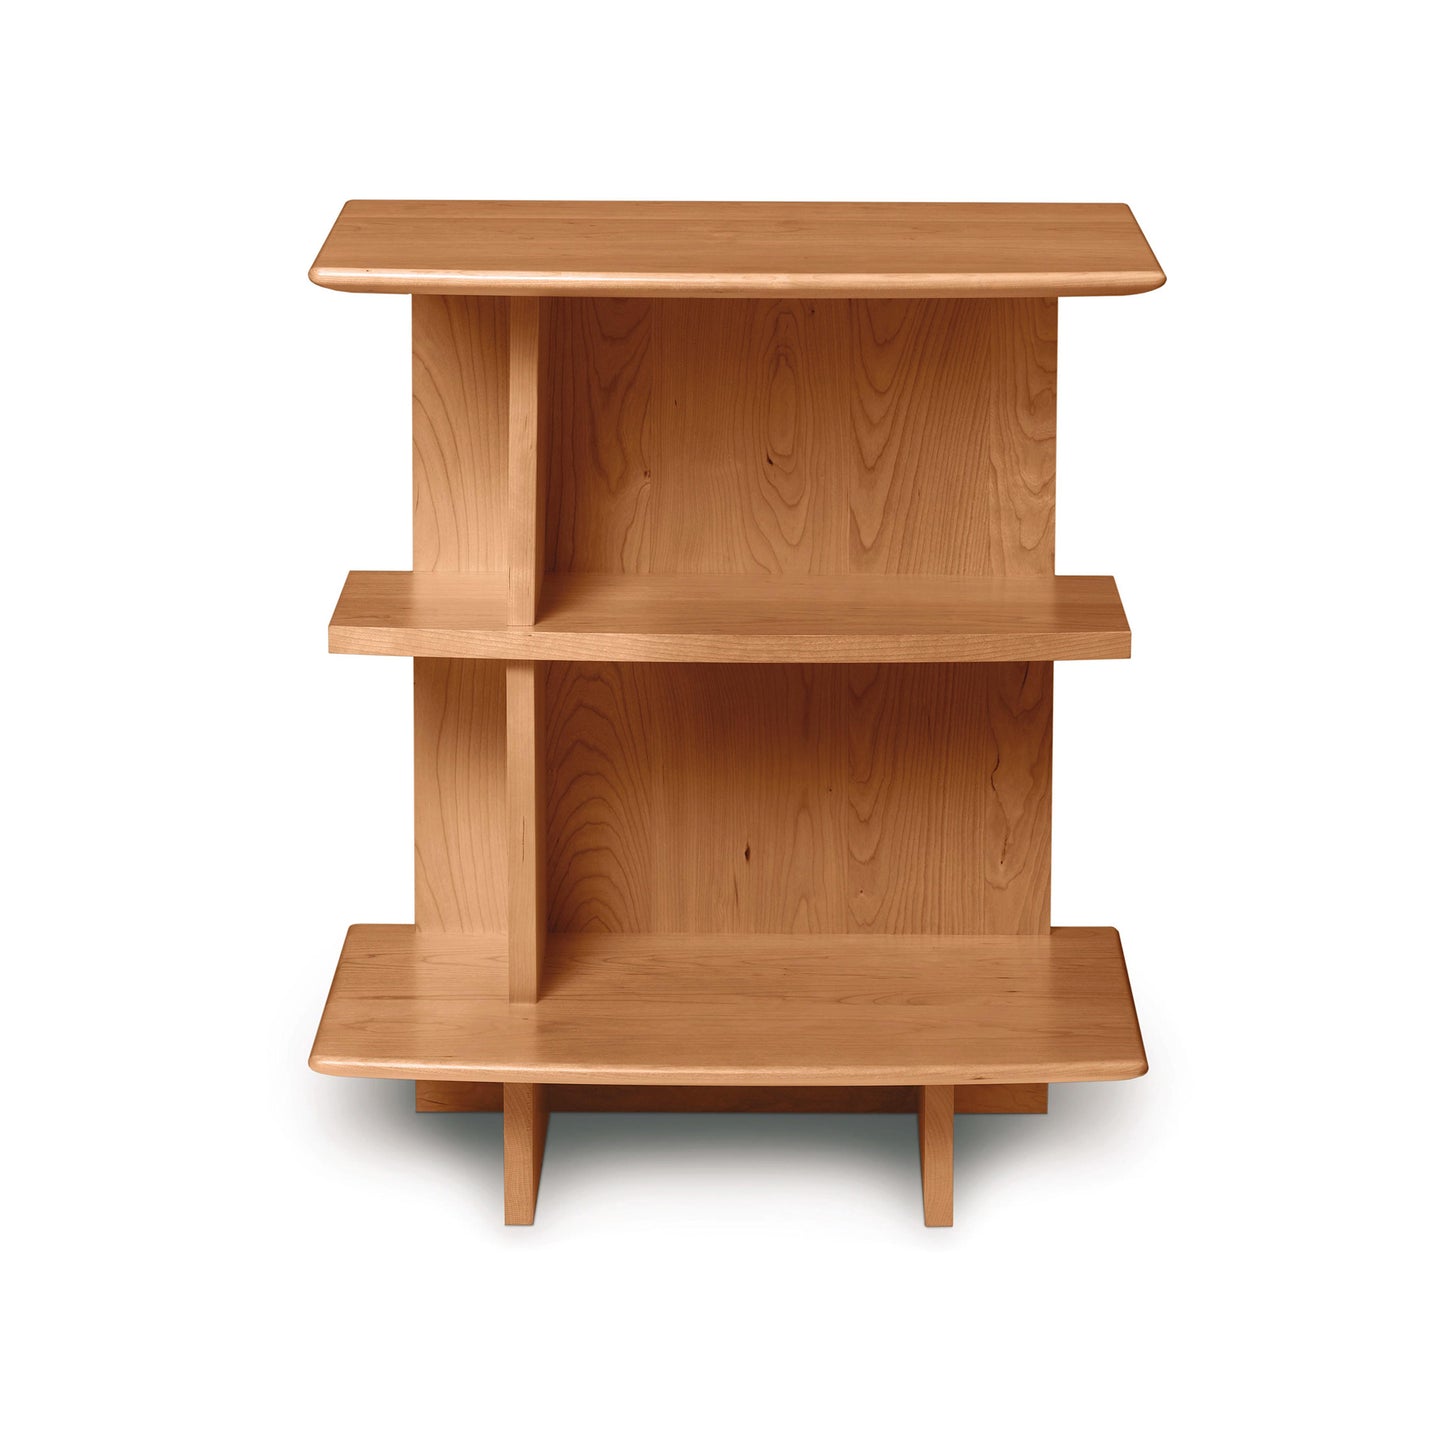 A small wooden shelf on a white background, featuring the Copeland Furniture Sarah Open Shelf Nightstand.